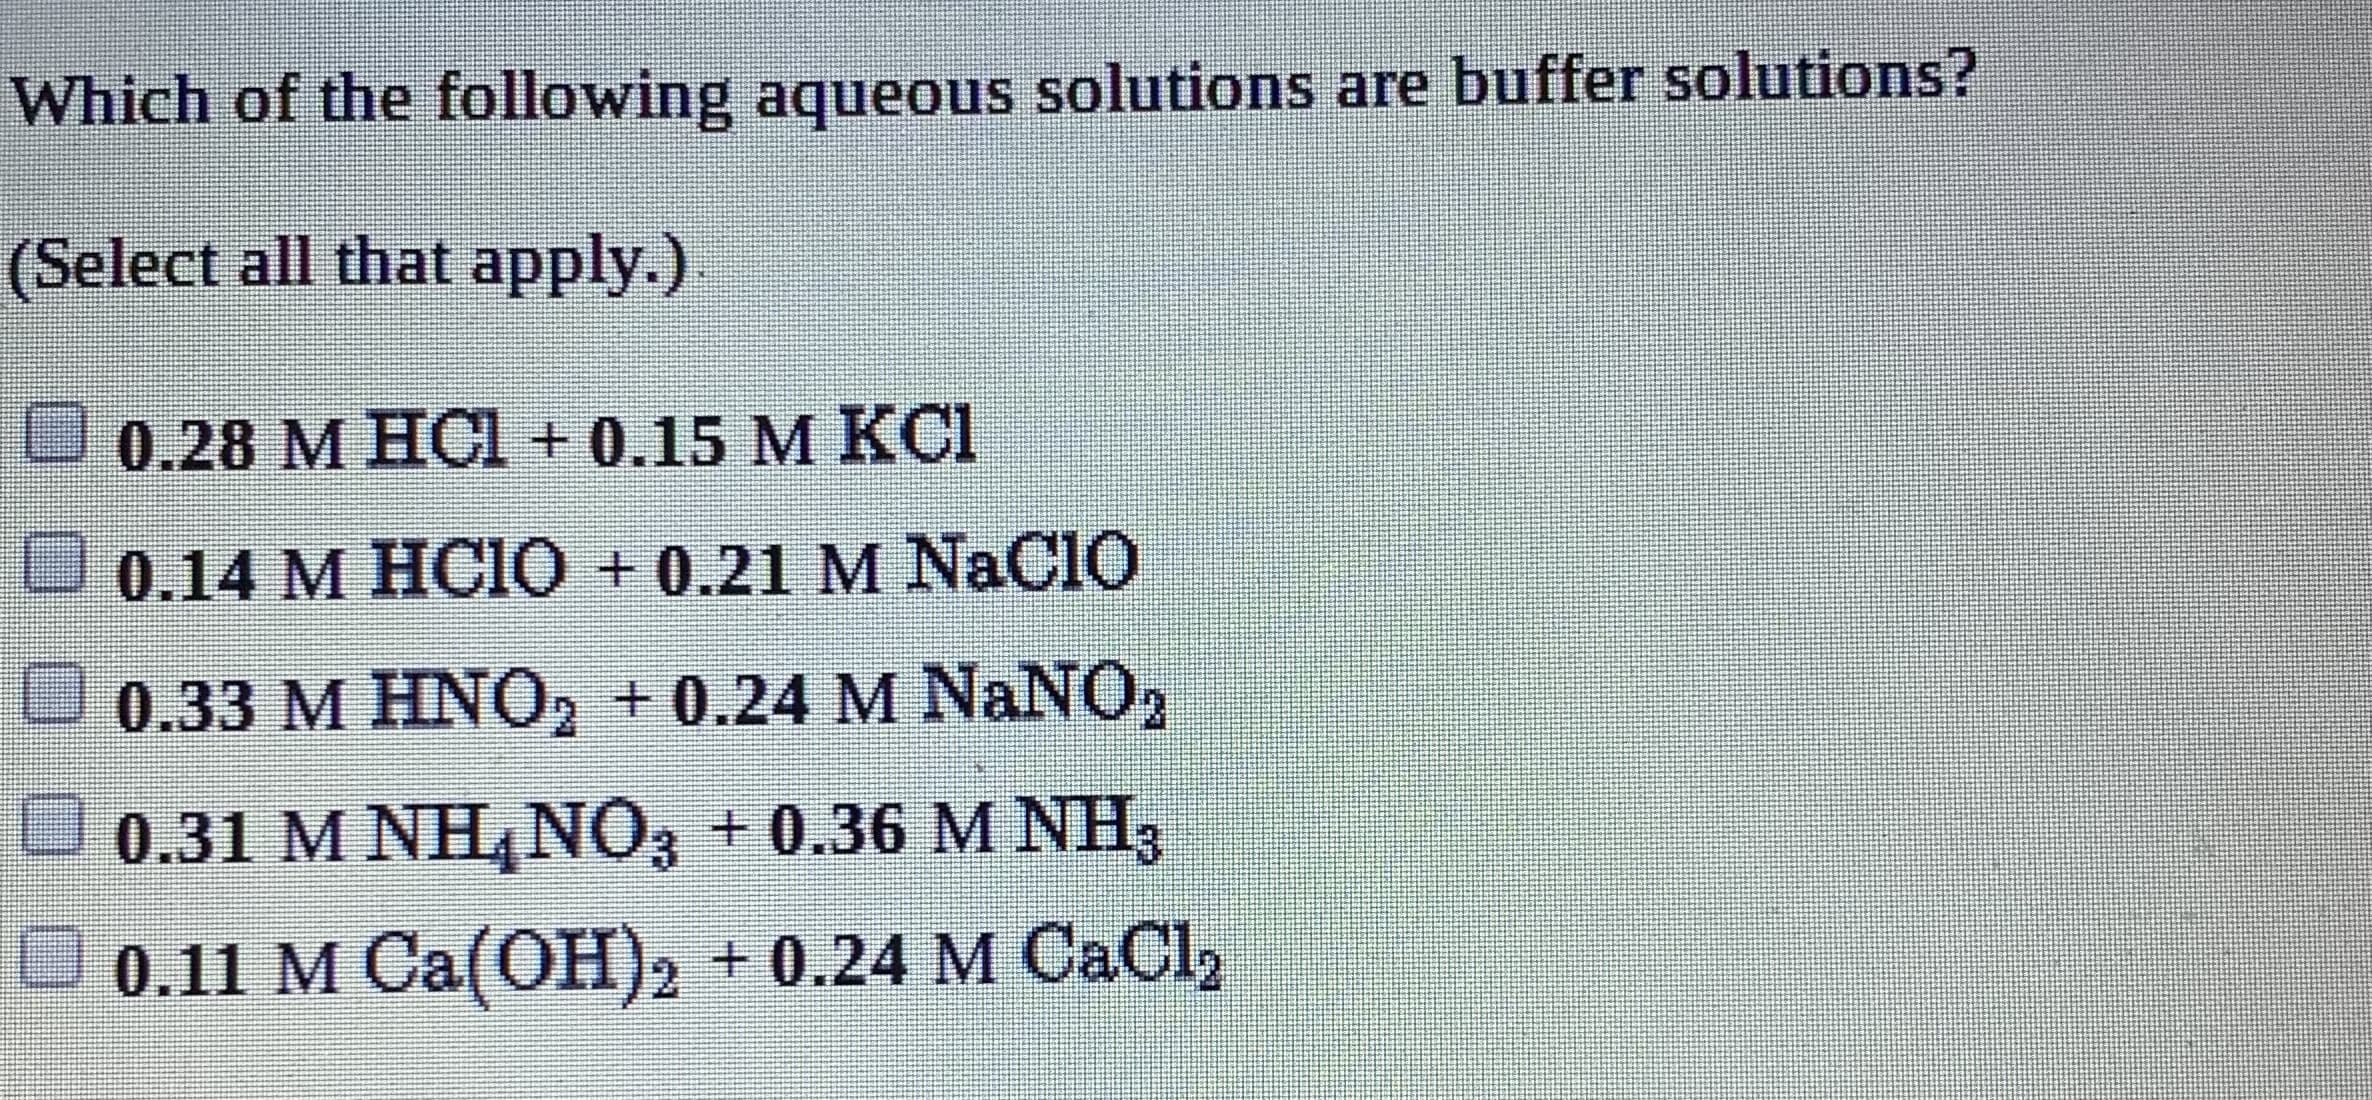 Which of the following aqueous solutions are buffer solutions?
(Select all that apply.).
0.28 M HCI + 0.15 M KCI
0.14 M HCIO + 0.21 M NaCIO
U 0.33 M HNO2 + 0.24 M NaNO2
U 0.31 M NH, NO3 + 0.36 M NH3
U 0.11 M Ca(OH)2 + 0.24 M CaCl,
